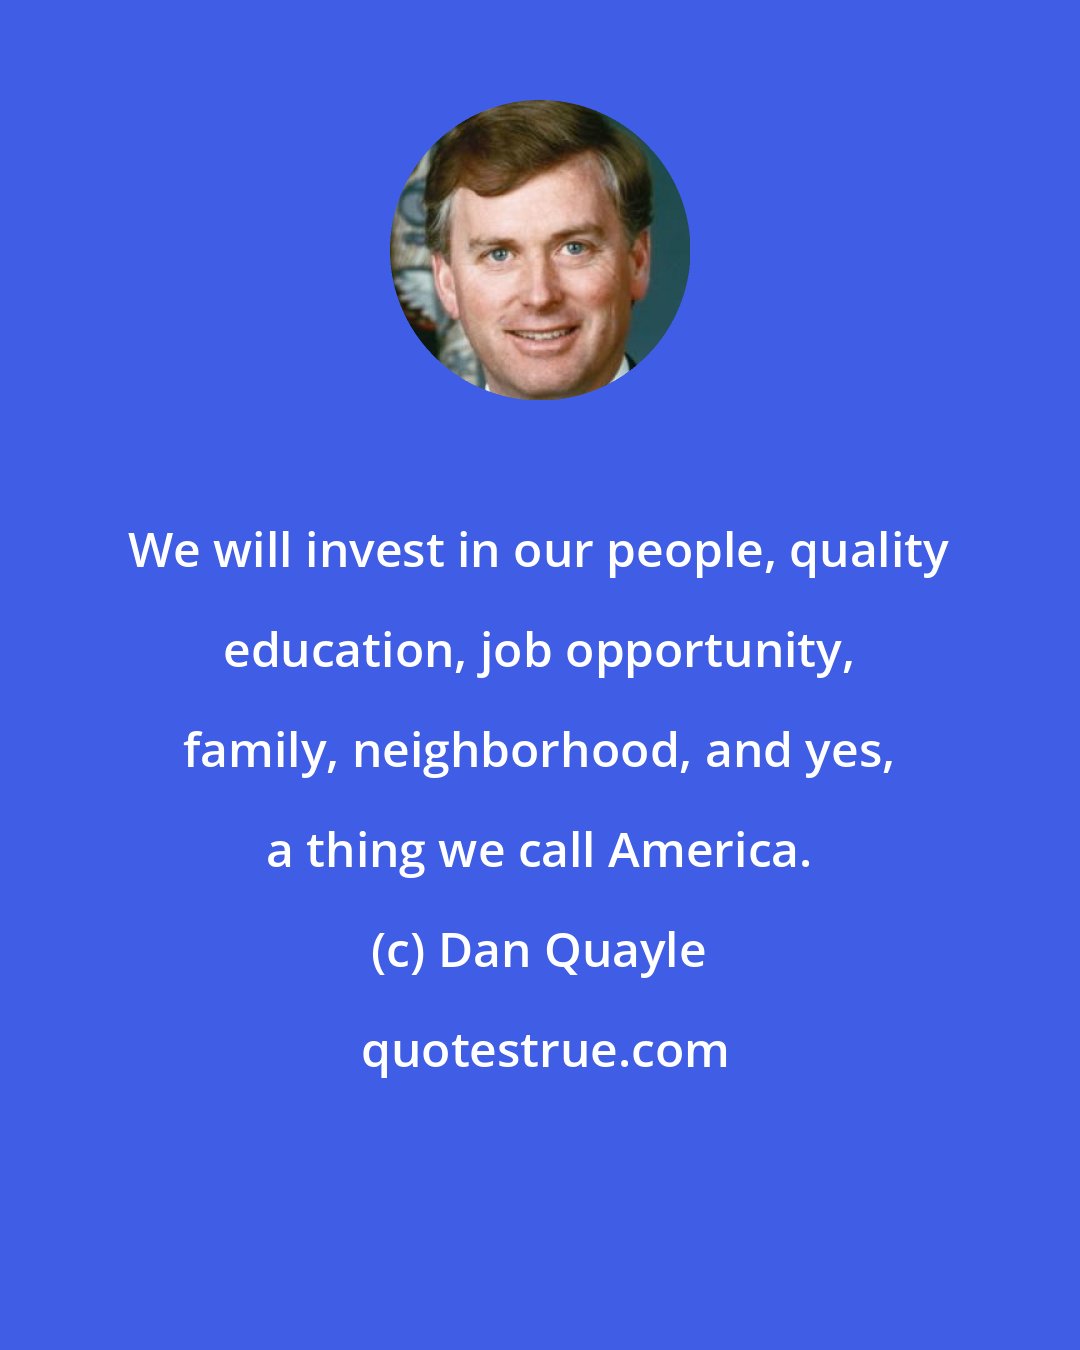 Dan Quayle: We will invest in our people, quality education, job opportunity, family, neighborhood, and yes, a thing we call America.